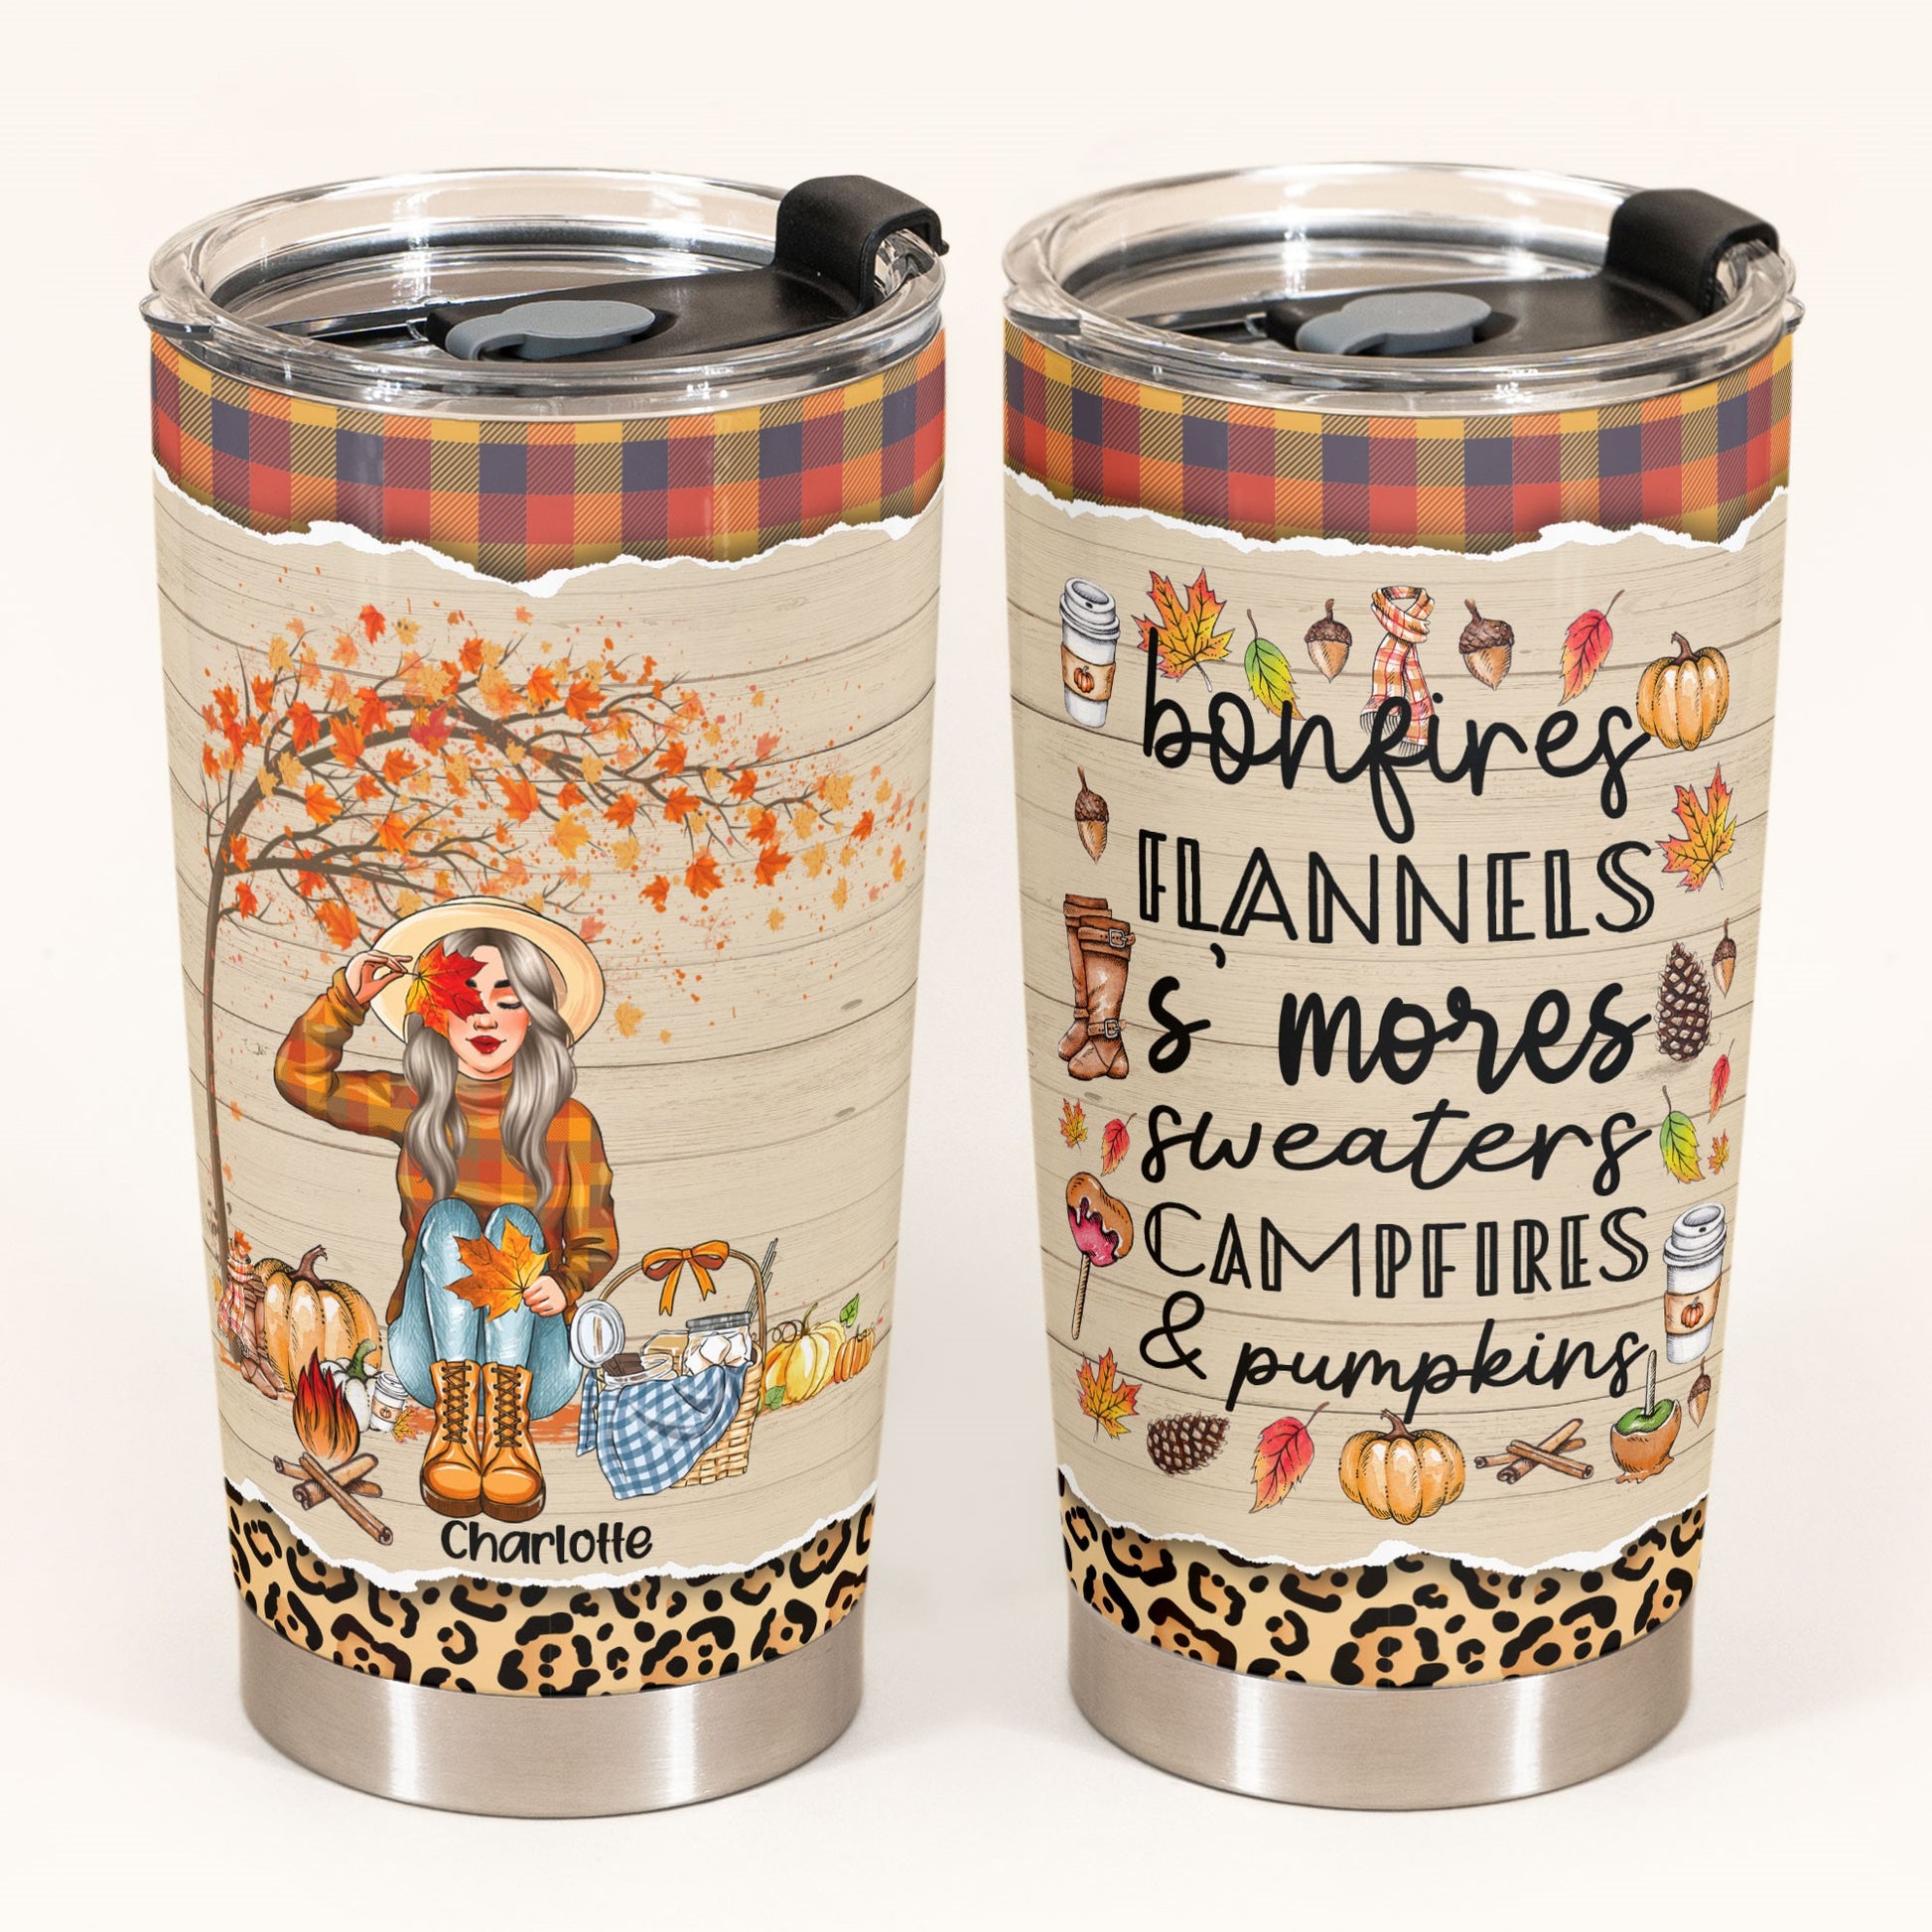 Bonfires Flannels S’mores Sweaters Campfires & Pumpkins - Personalized Tumbler Cup - Fall Season Gift For Girls - Autumn Girl Front